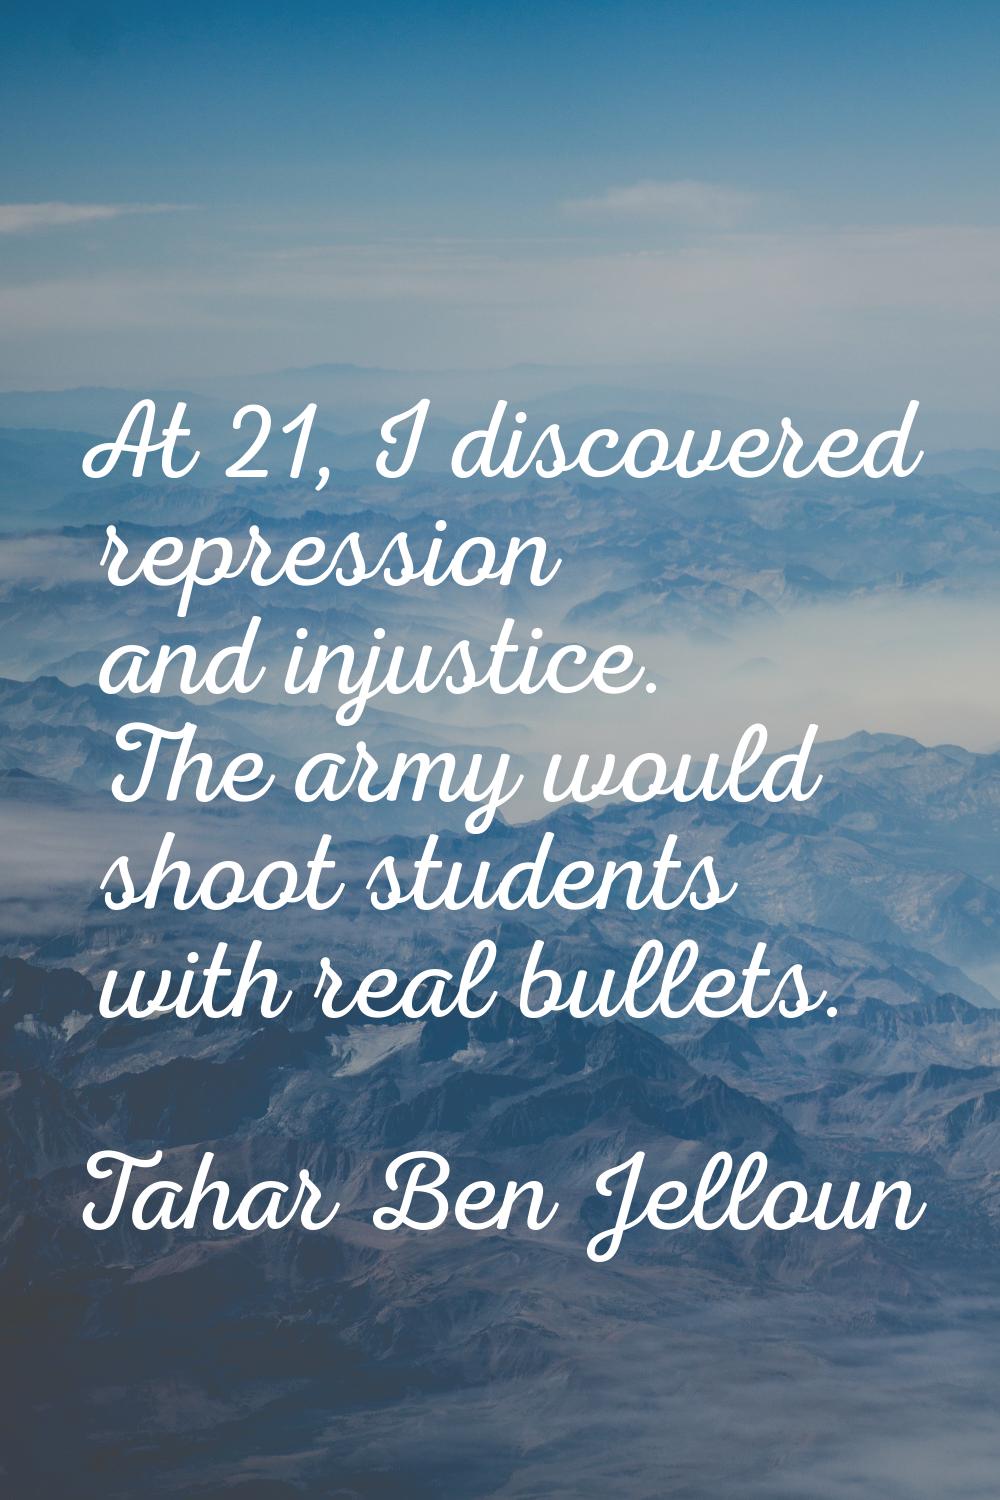 At 21, I discovered repression and injustice. The army would shoot students with real bullets.